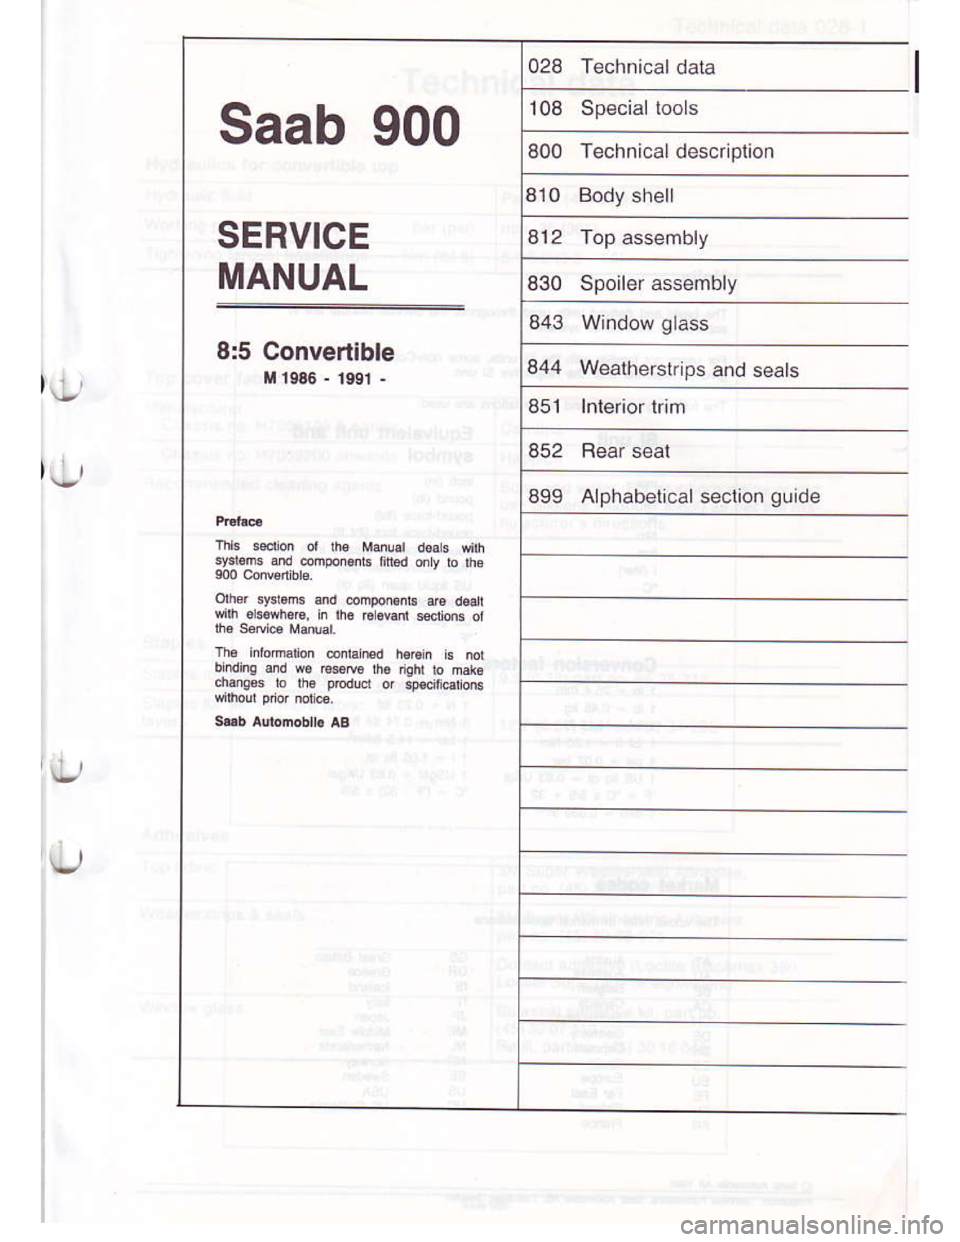 SAAB 900 1986  Service Manual Downloaded from www.Manualslib.com manuals search engine Saab 900
SERVICE
MANUAL
8:5 Convertlble
M i986 - r99r -
om&3Fl.m!andconpoMbarcd.ah
blidinged@l*rohiglibhdo
6.n$sjoh€pddogp€.ilc|ong
108 S